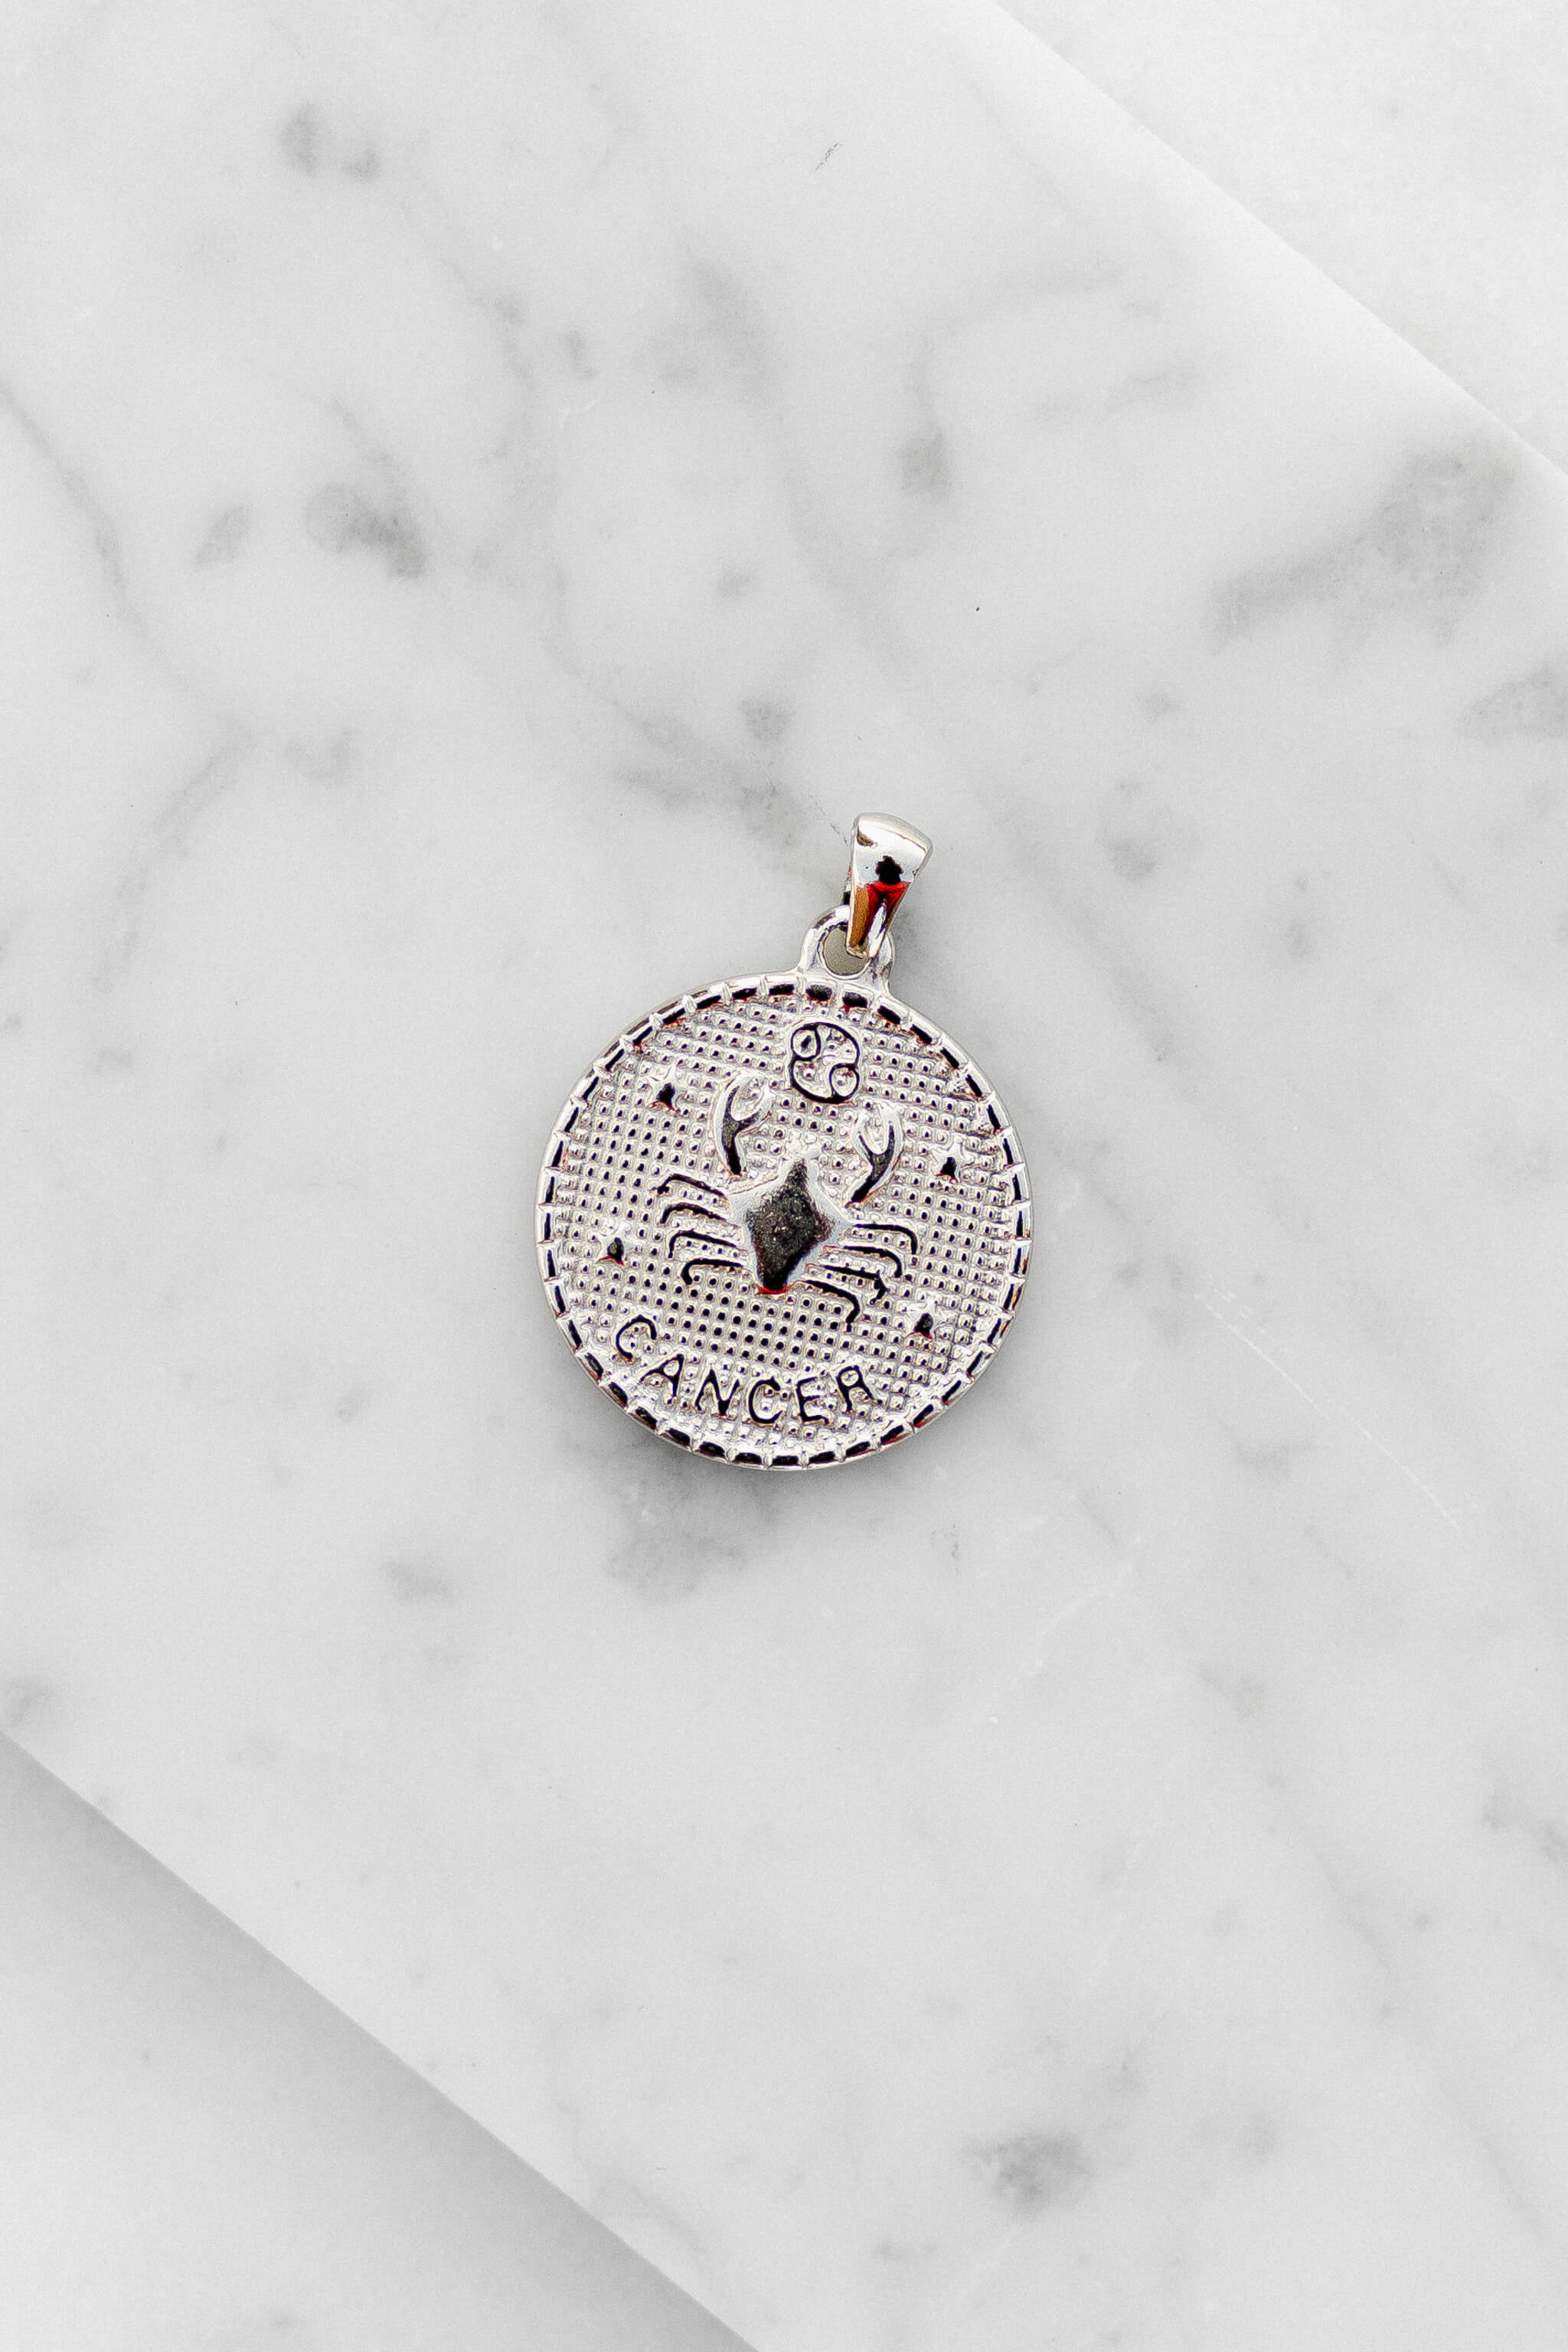 Cancer zodiac sign silver coin charm laying on a white marble